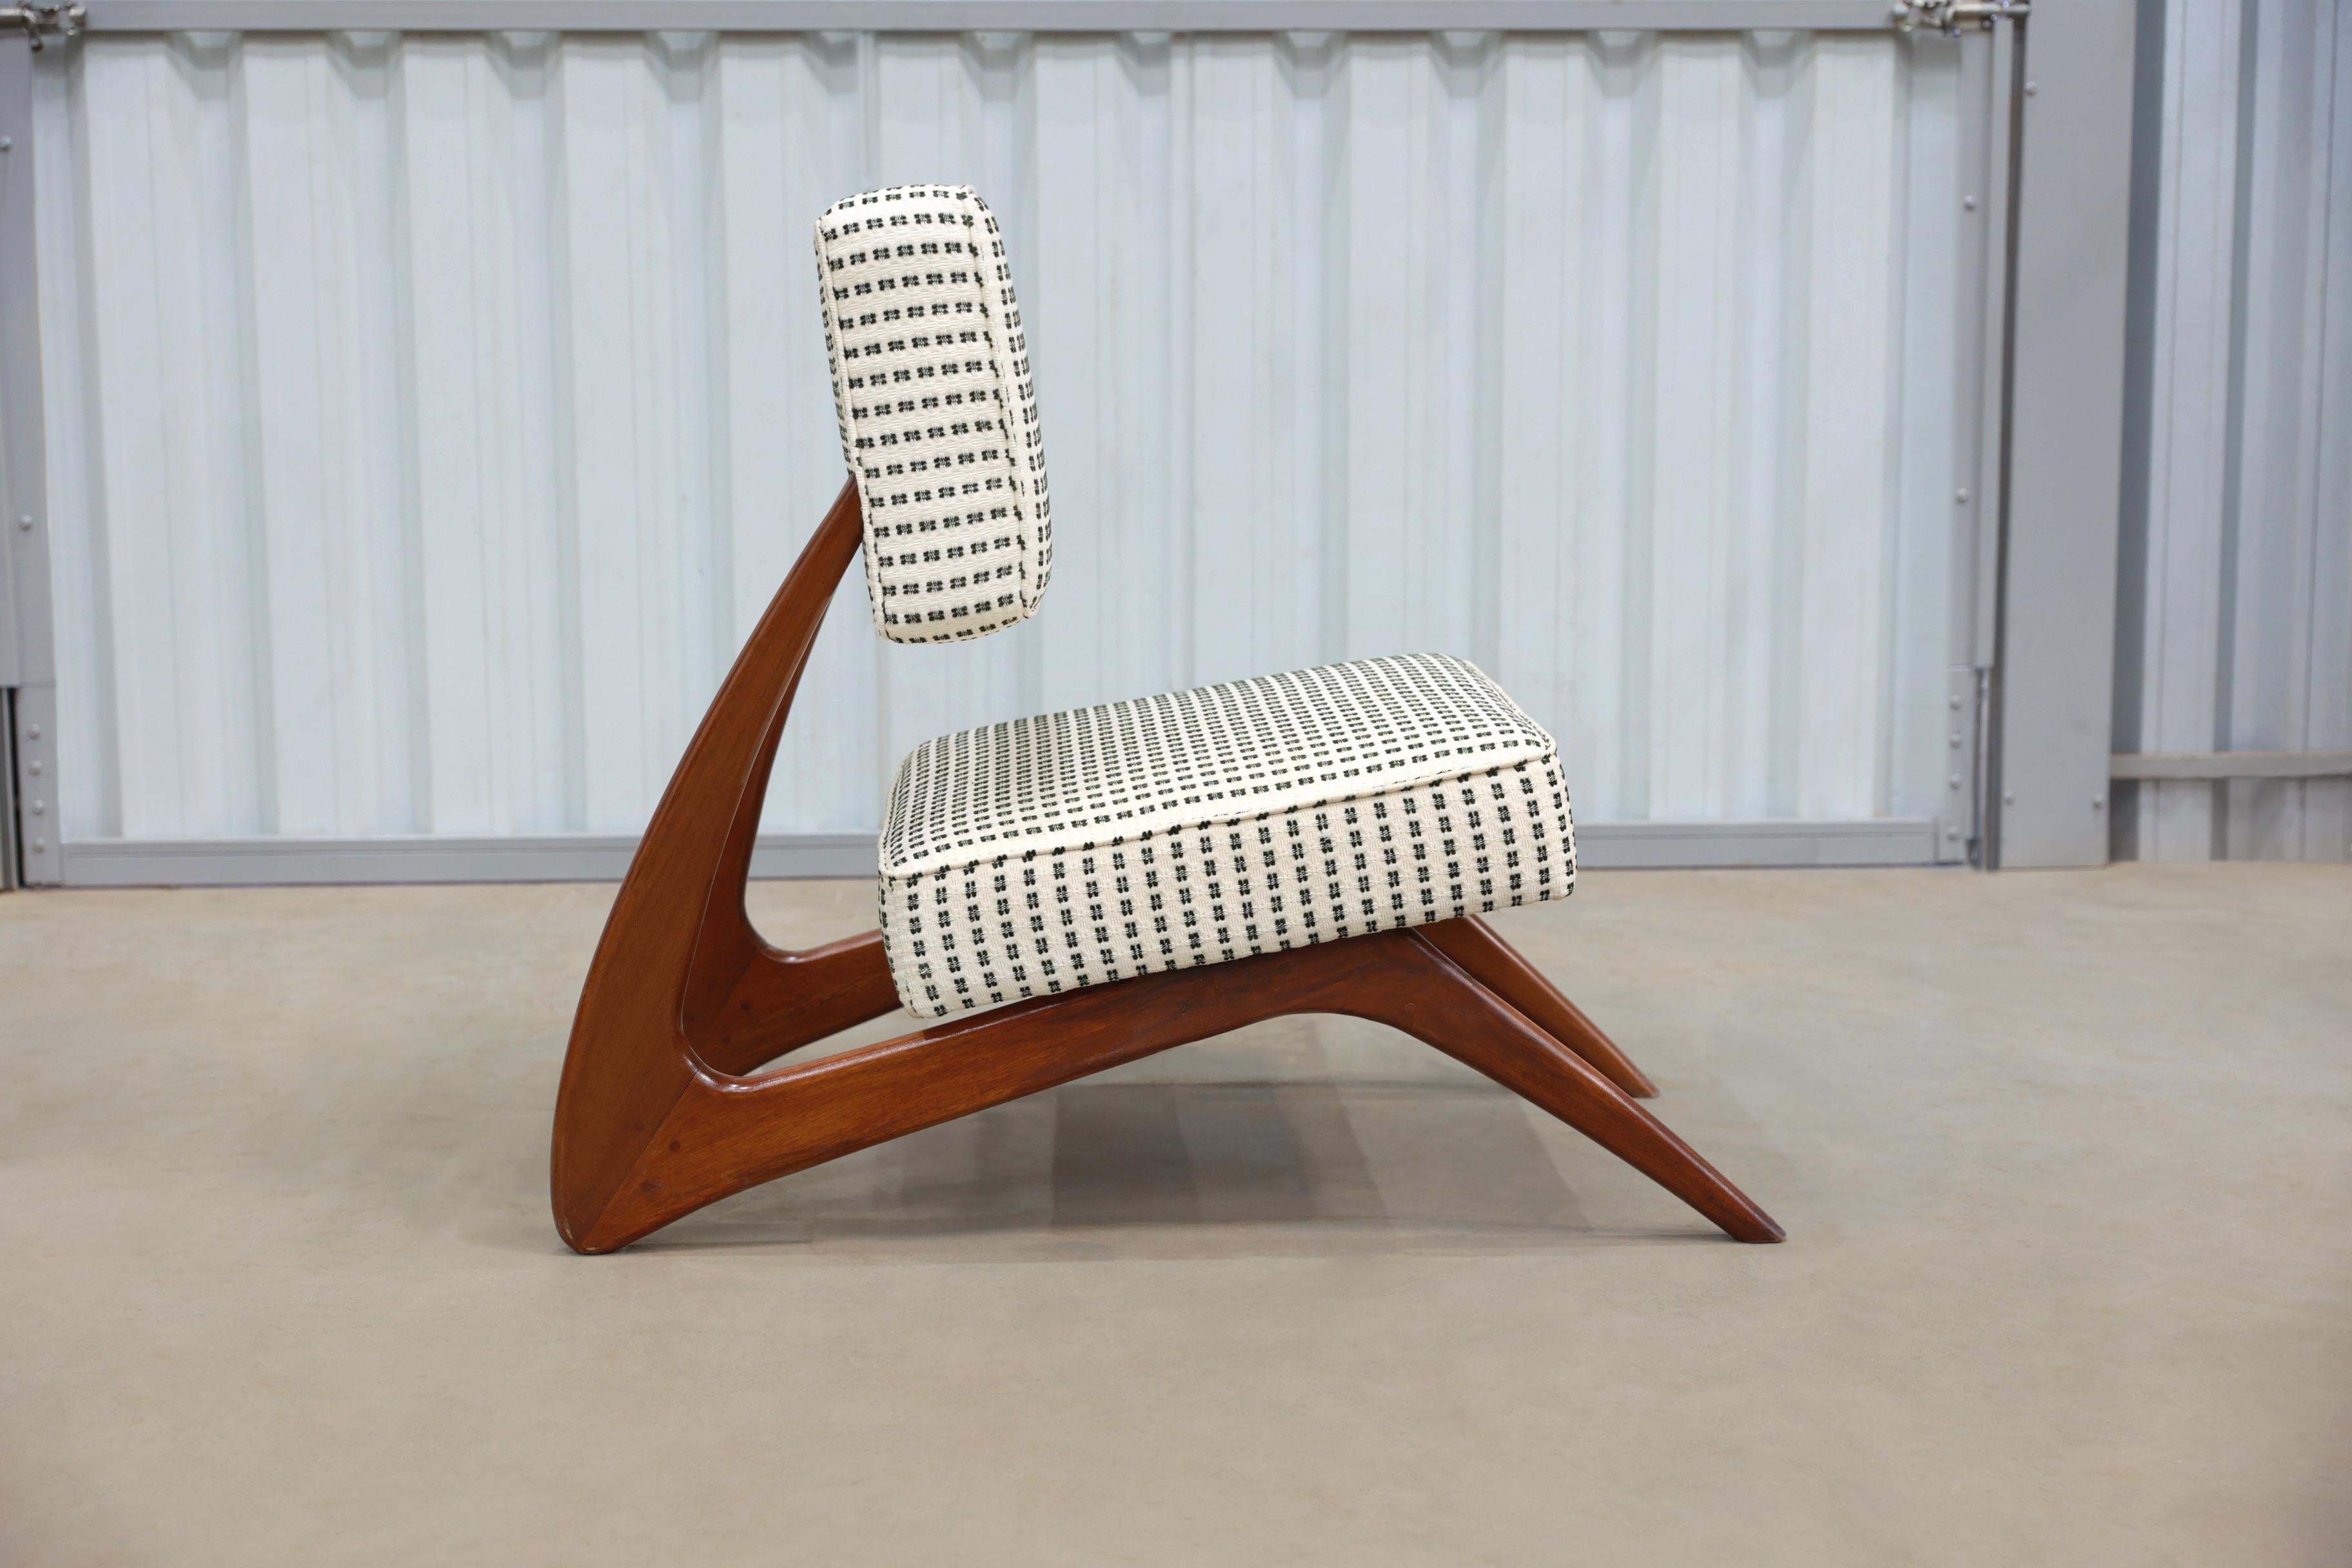 Mid-Century Modern Brazilian Modern Lounge Chair in hardwood by Moveis Cimo, Brazil, 1950s For Sale